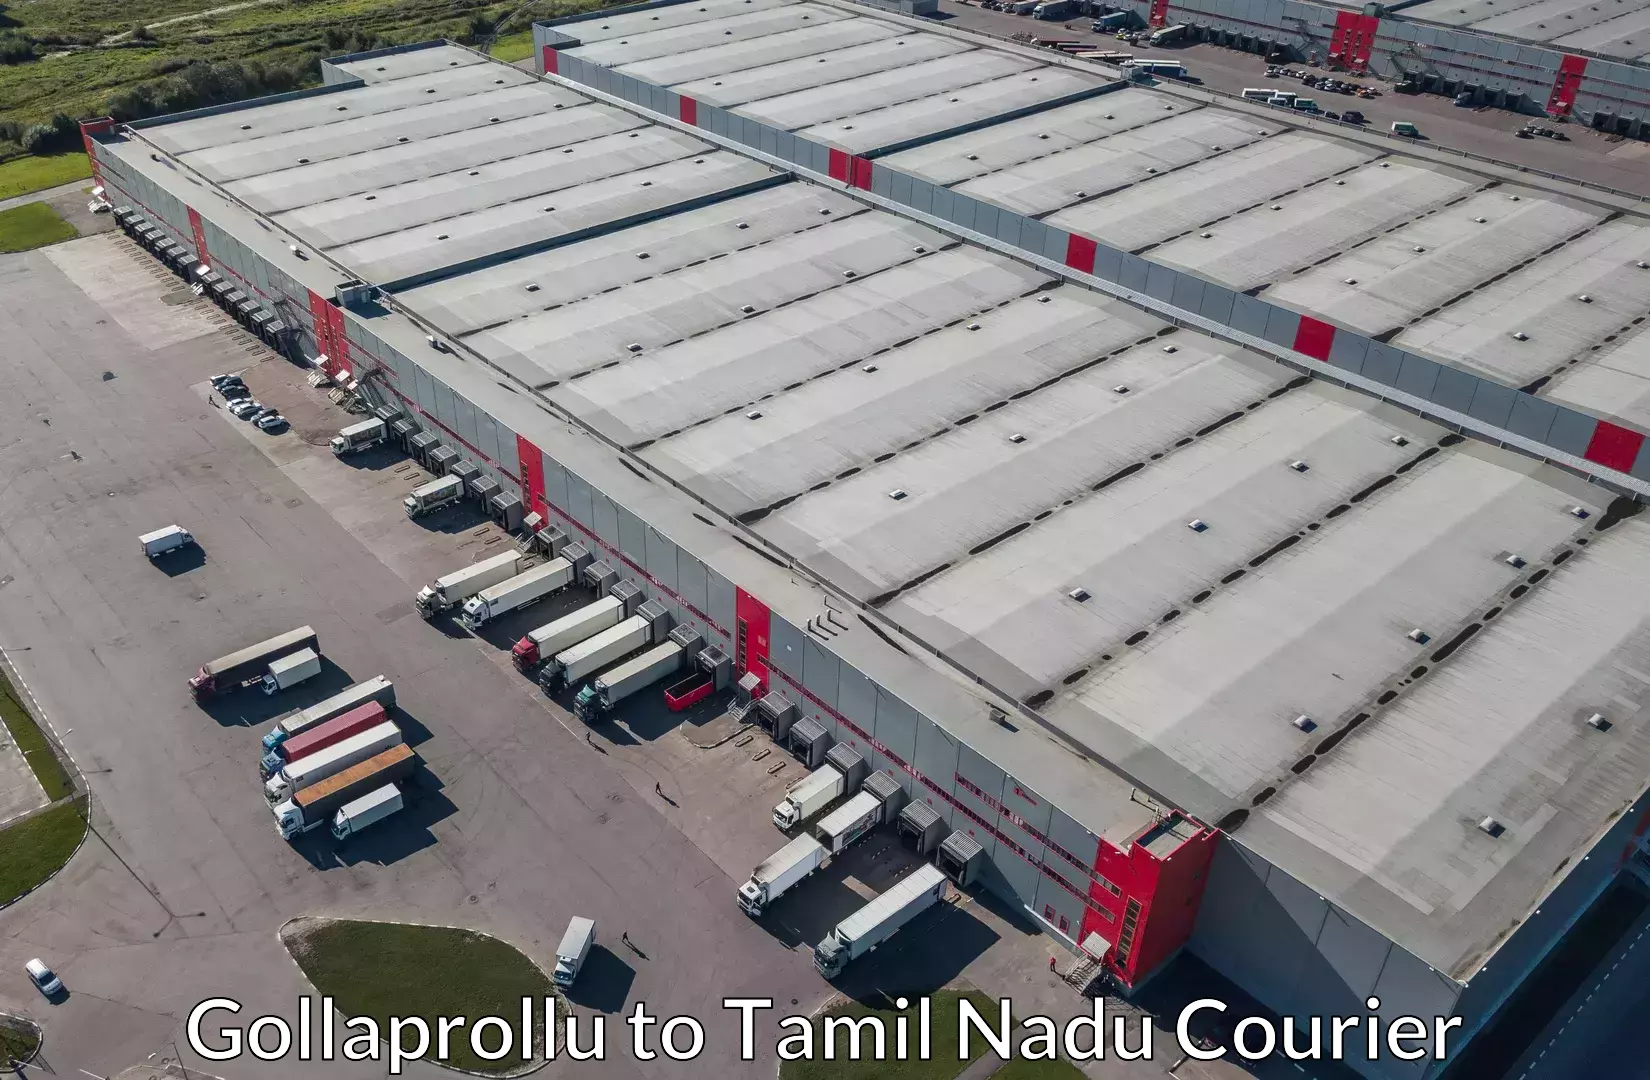 Reliable goods transport in Gollaprollu to Chennai Port